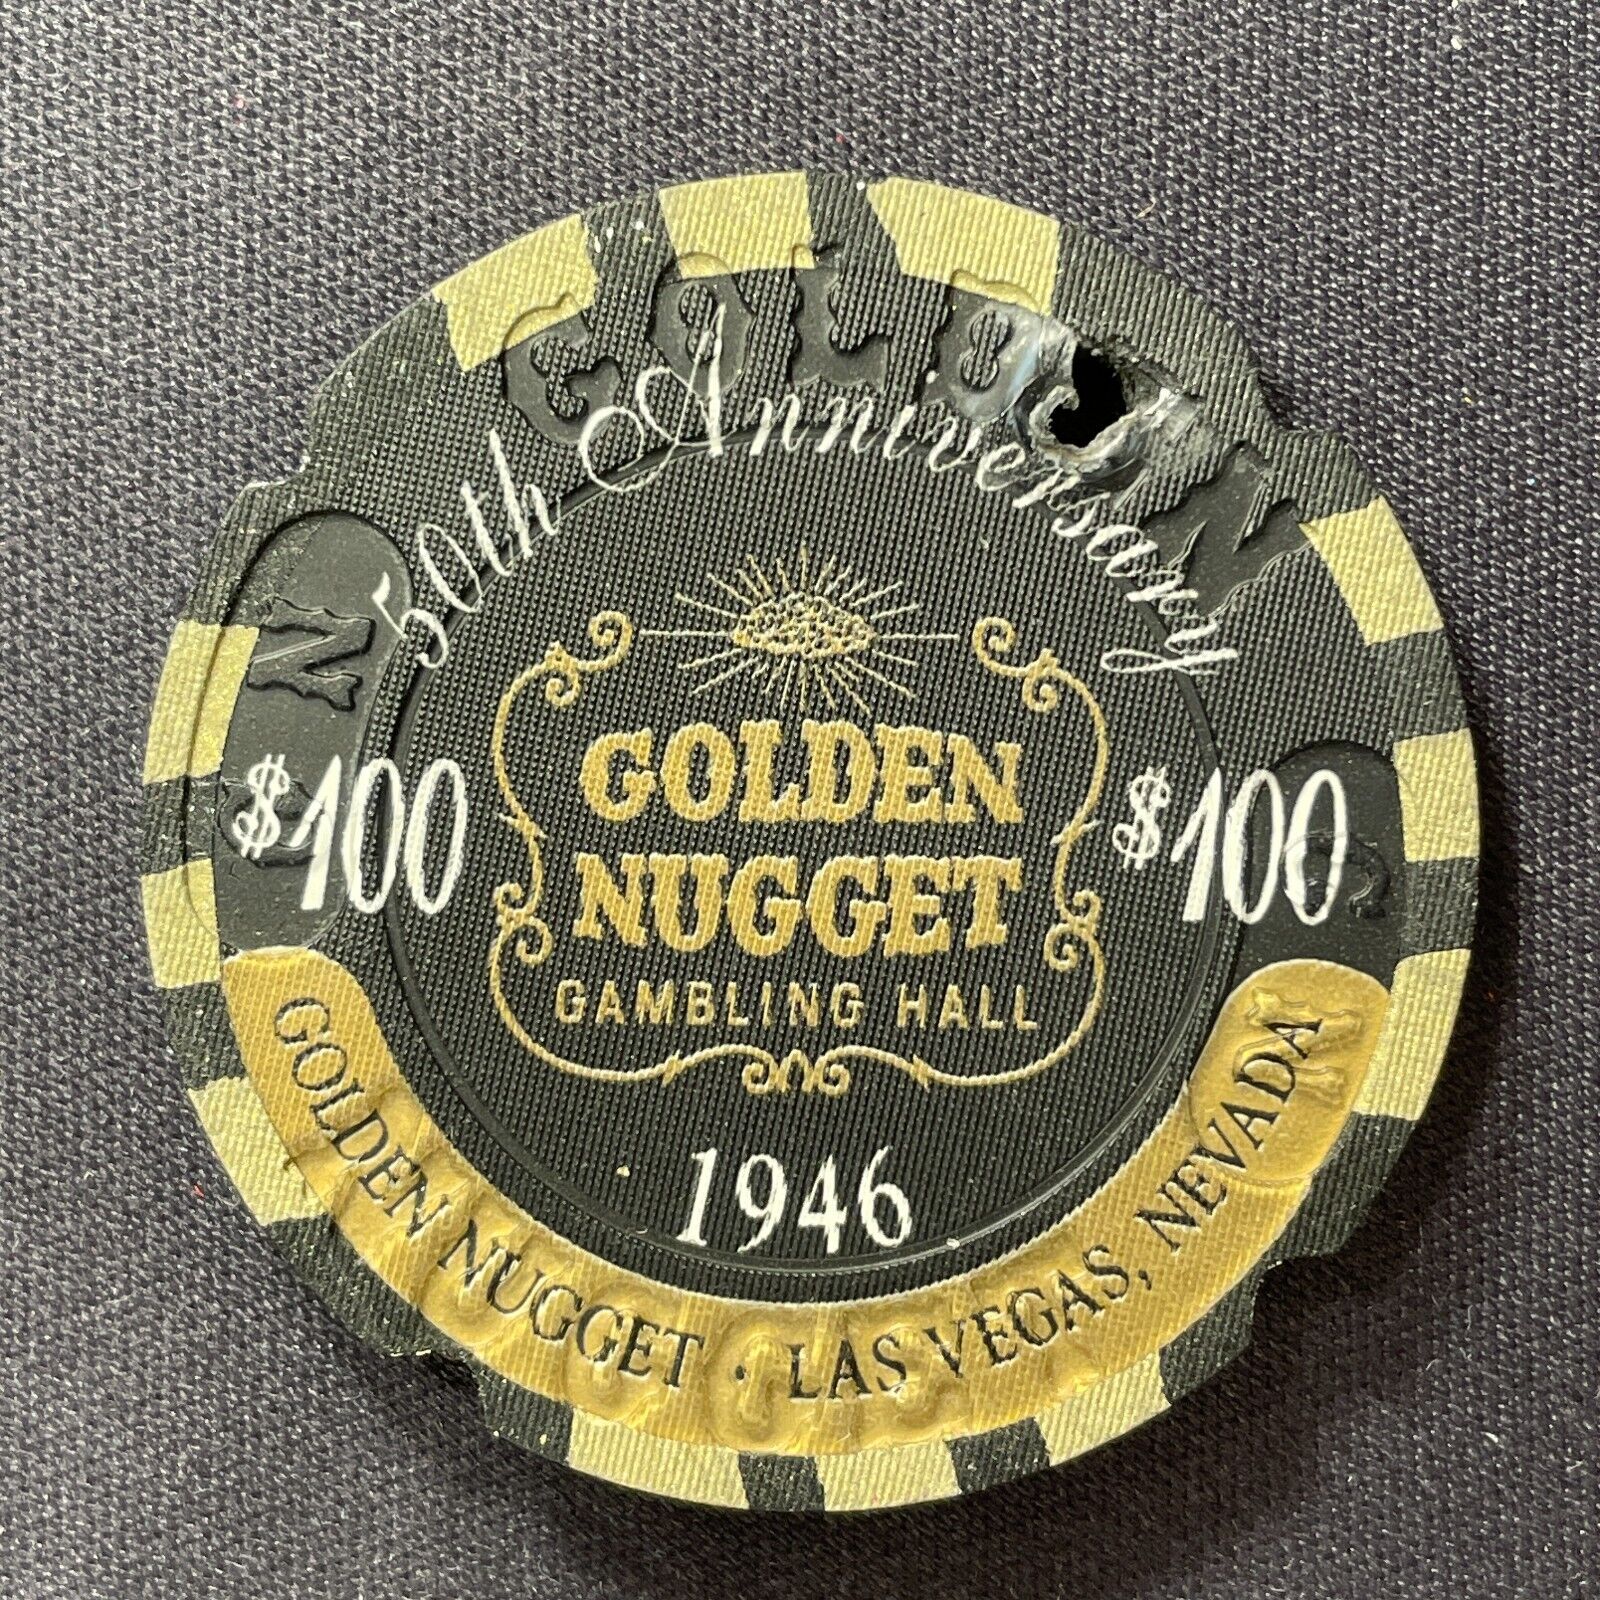 Golden Nugget Las Vegas $100 casino chip 50th anniversary notched HL